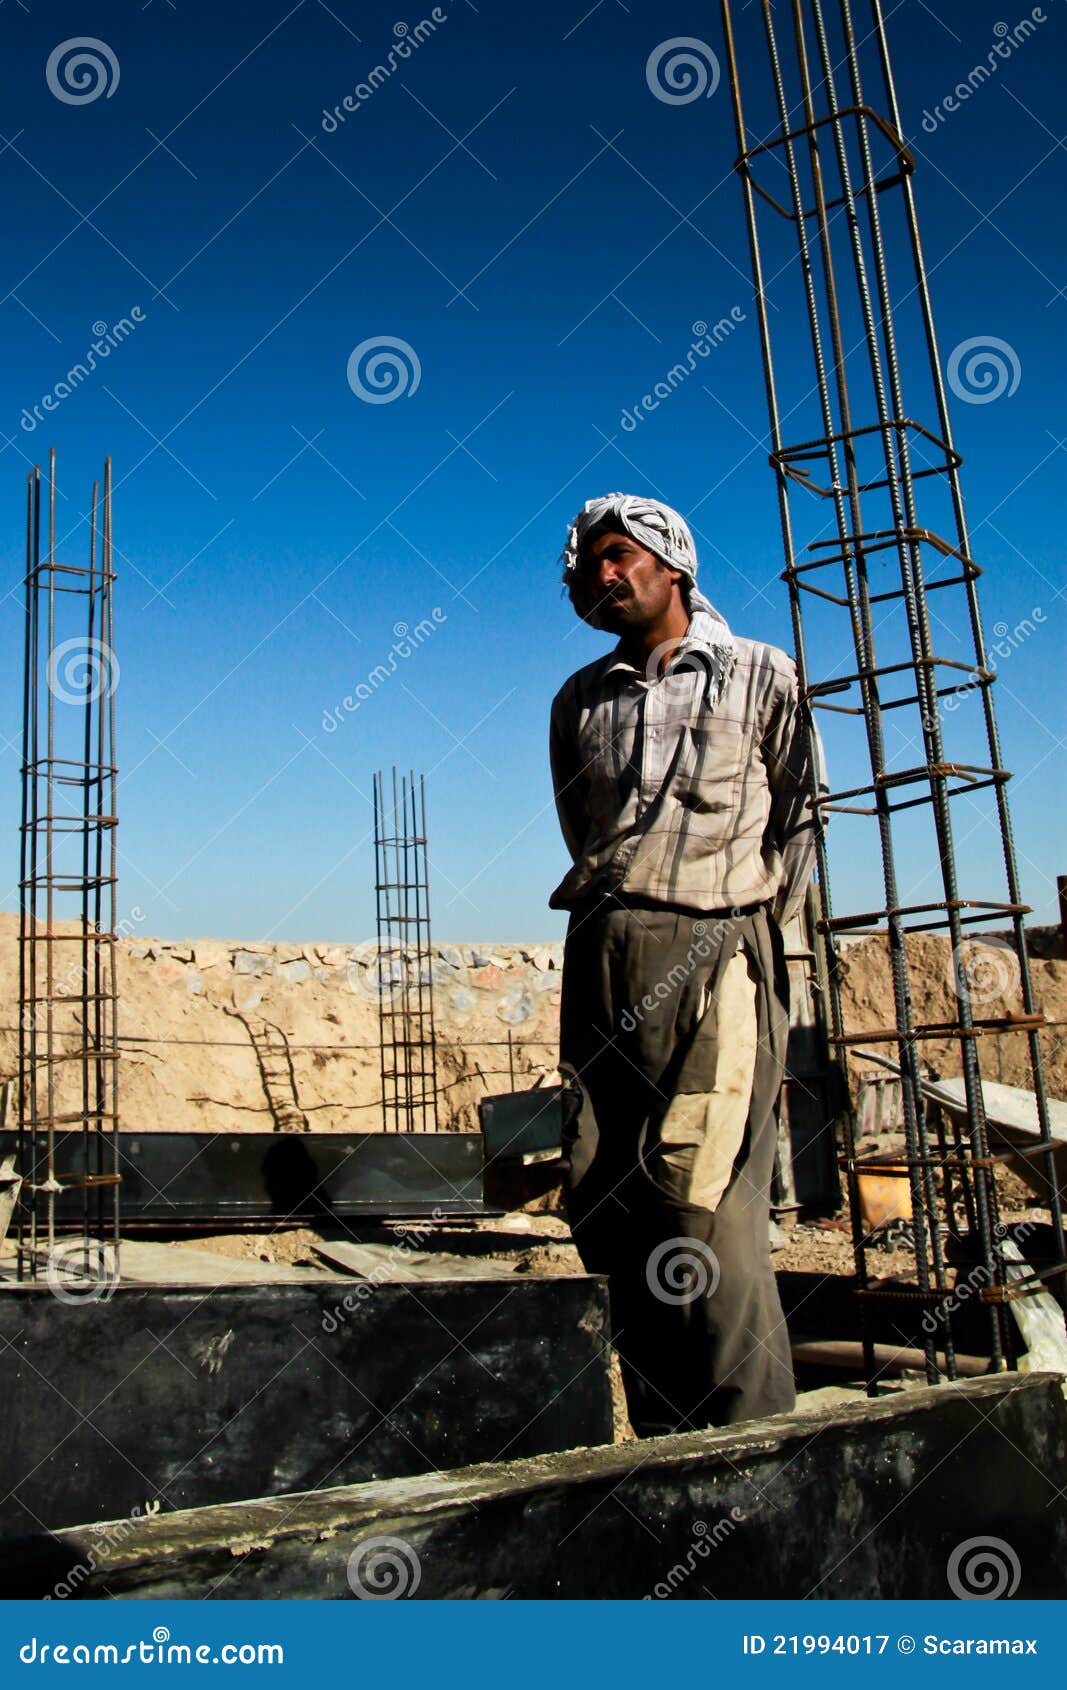 Contract construction jobs afghanistan